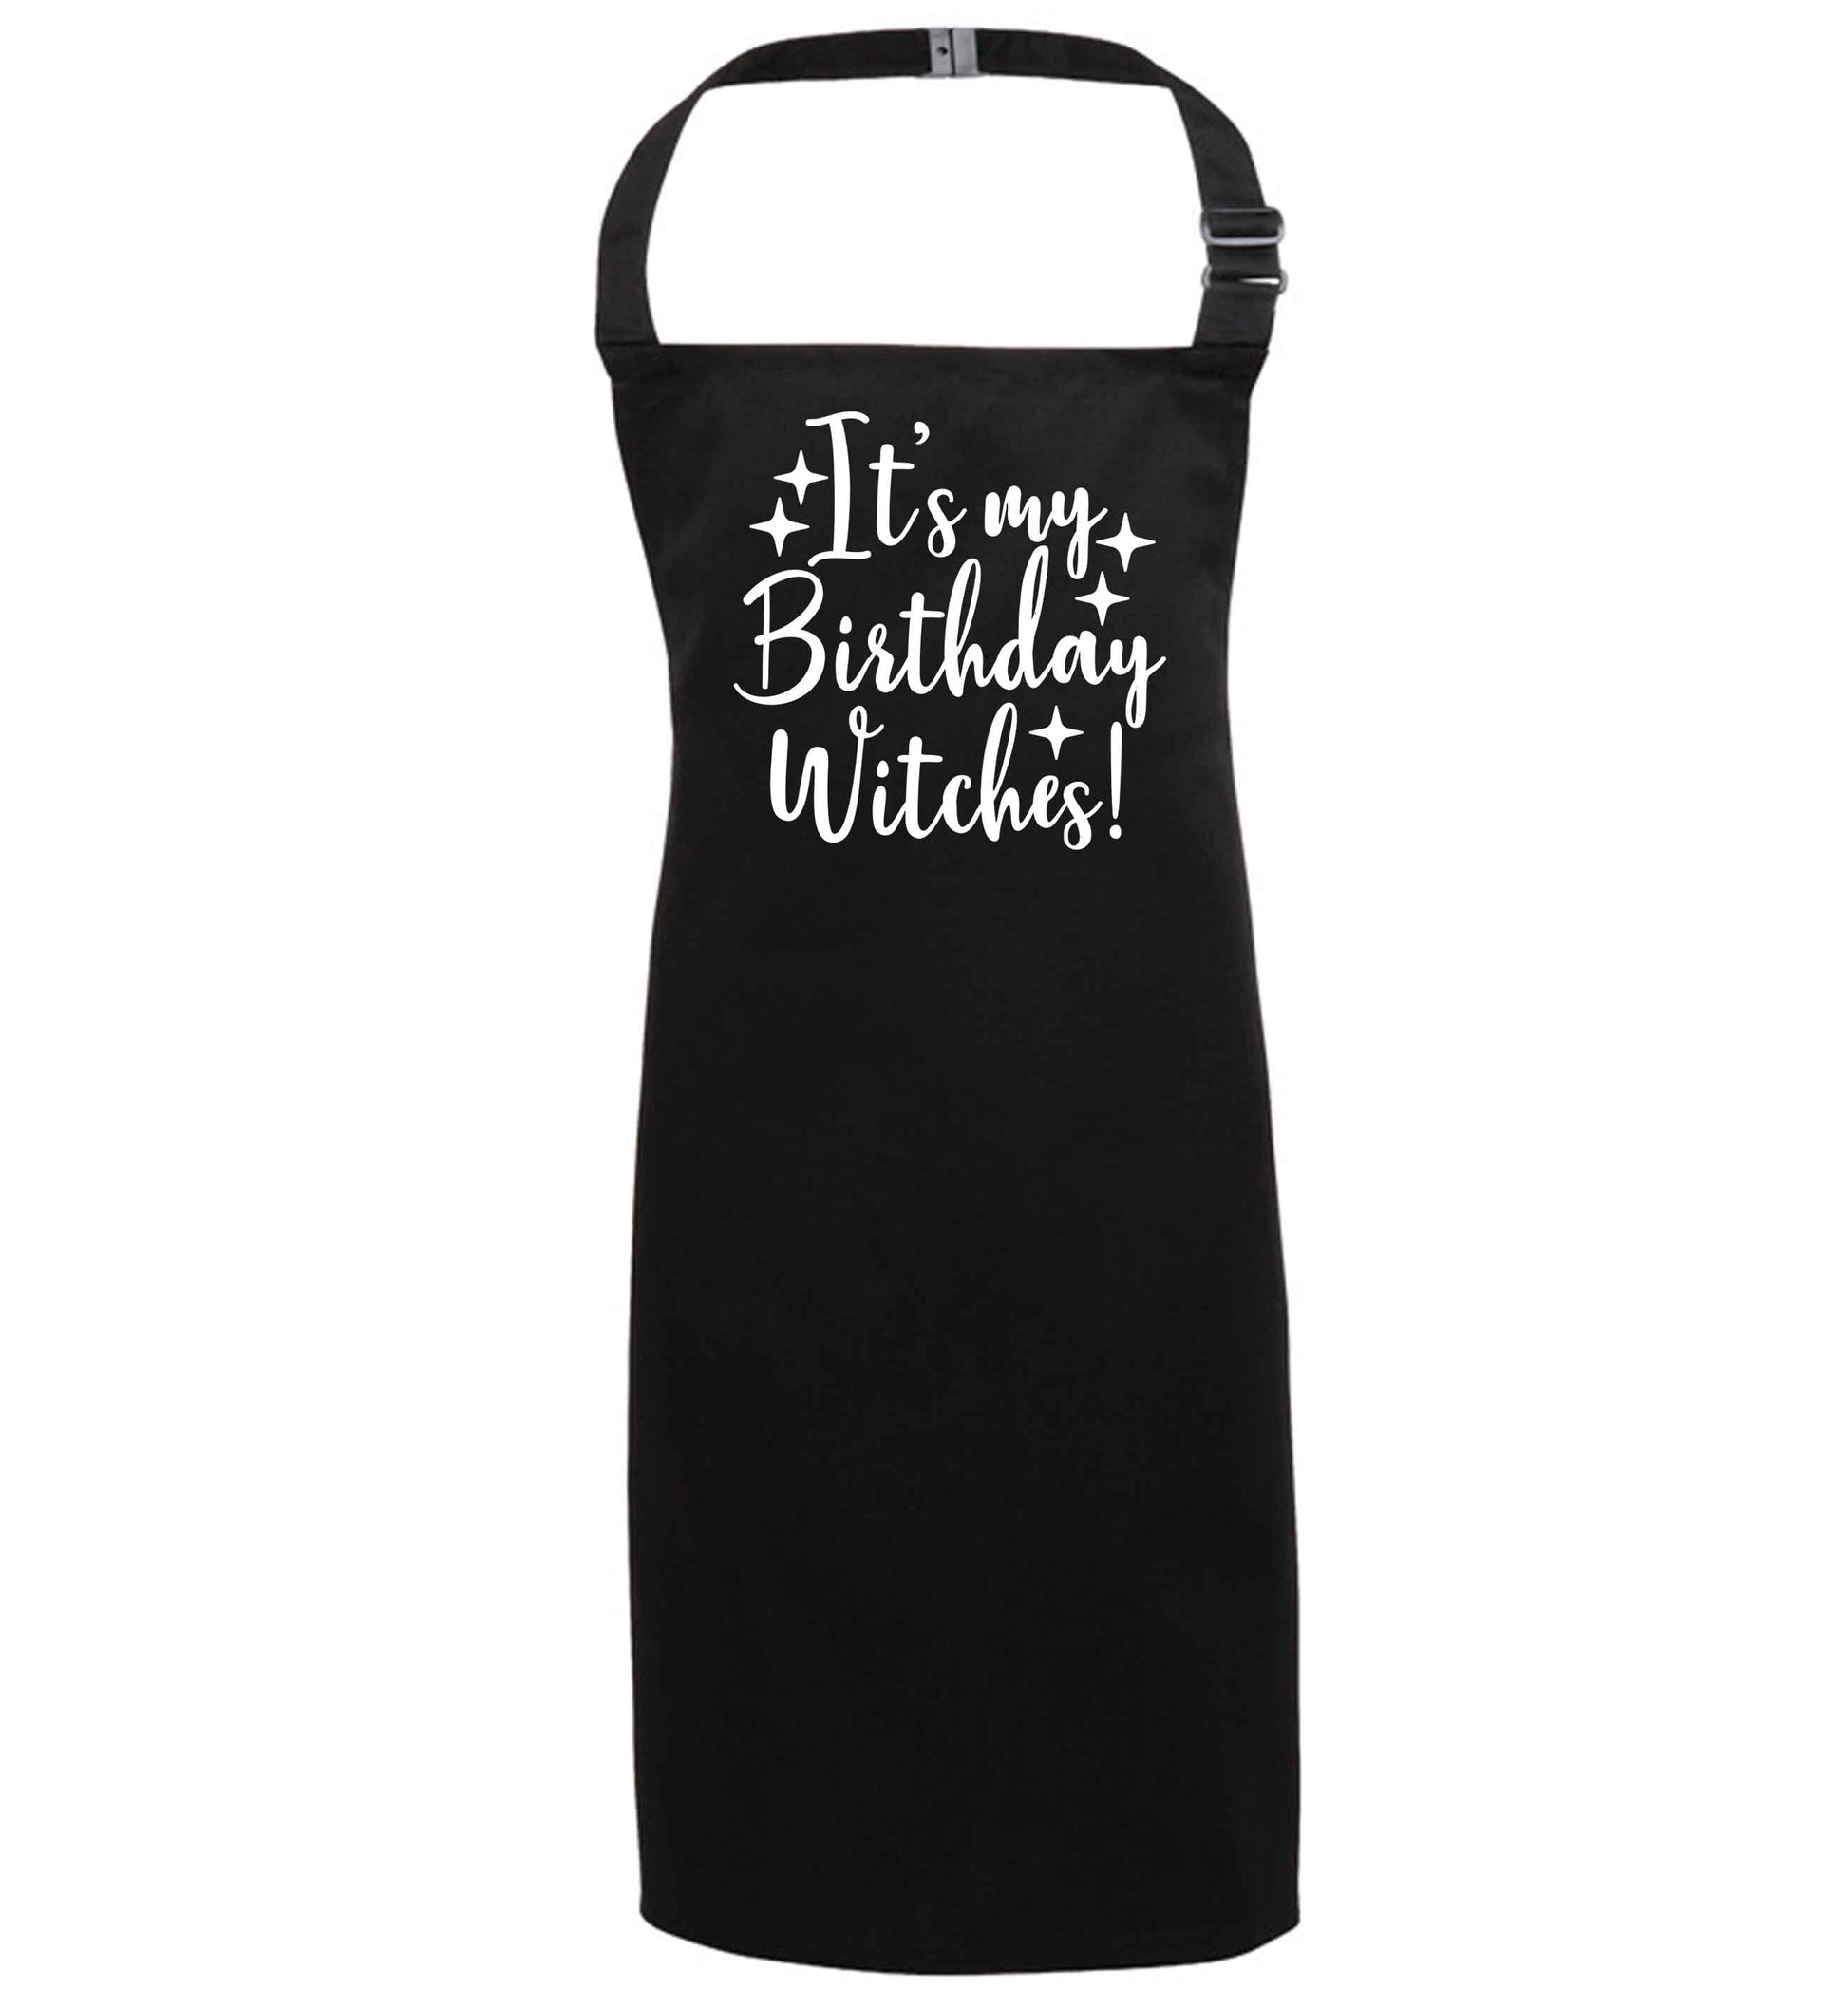 It's my birthday witches!black apron 7-10 years